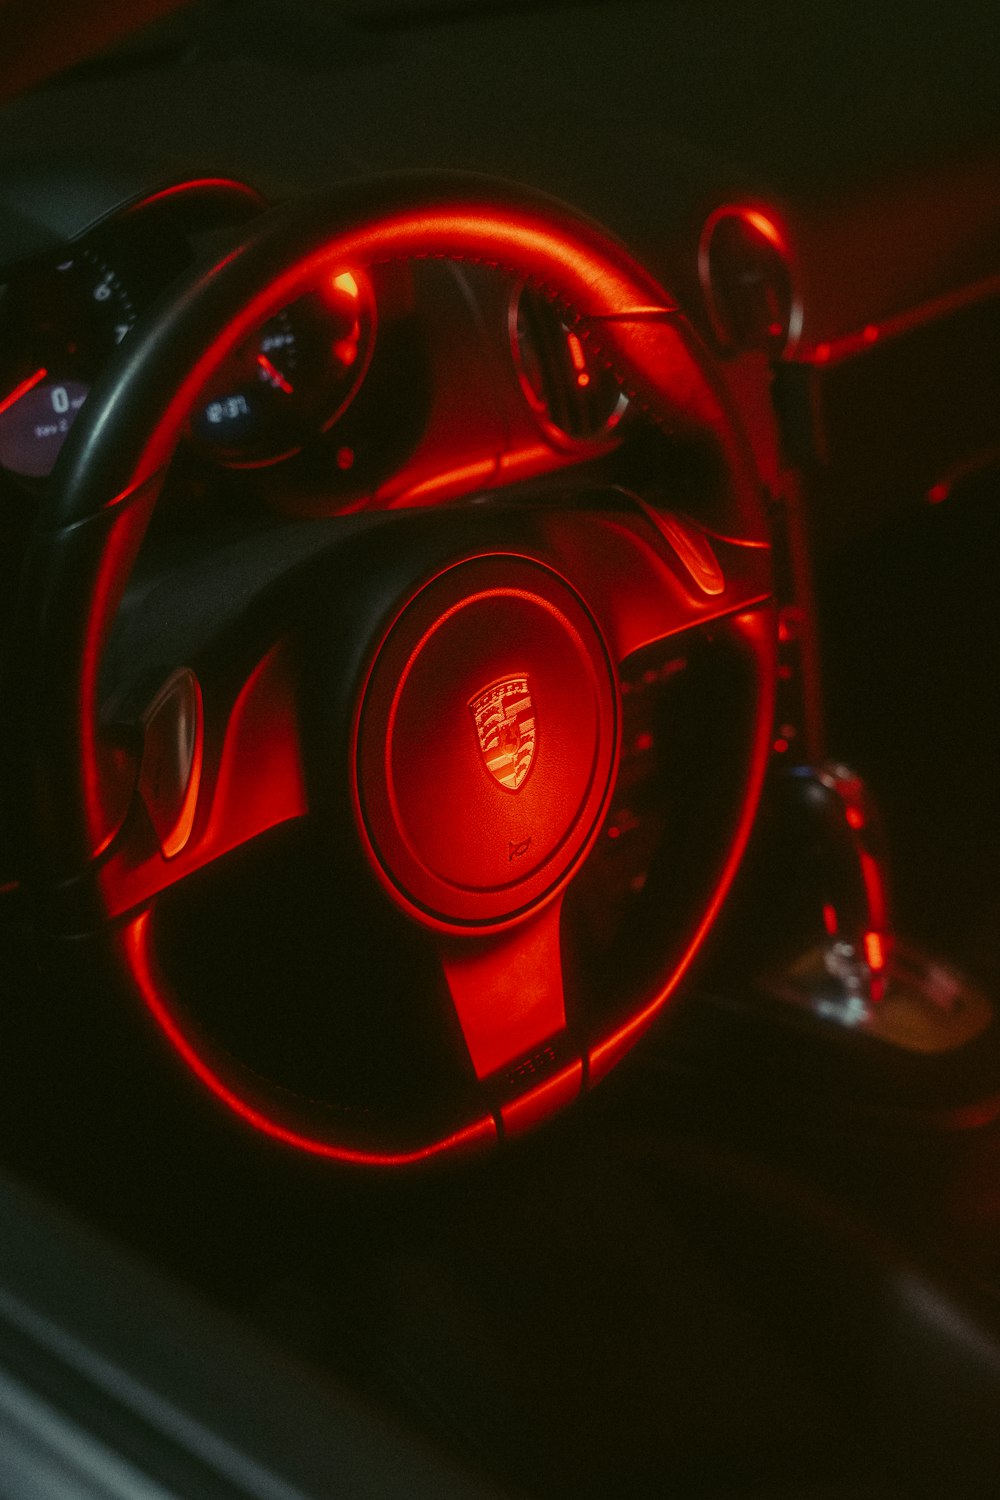 a close up of a steering wheel with a red light